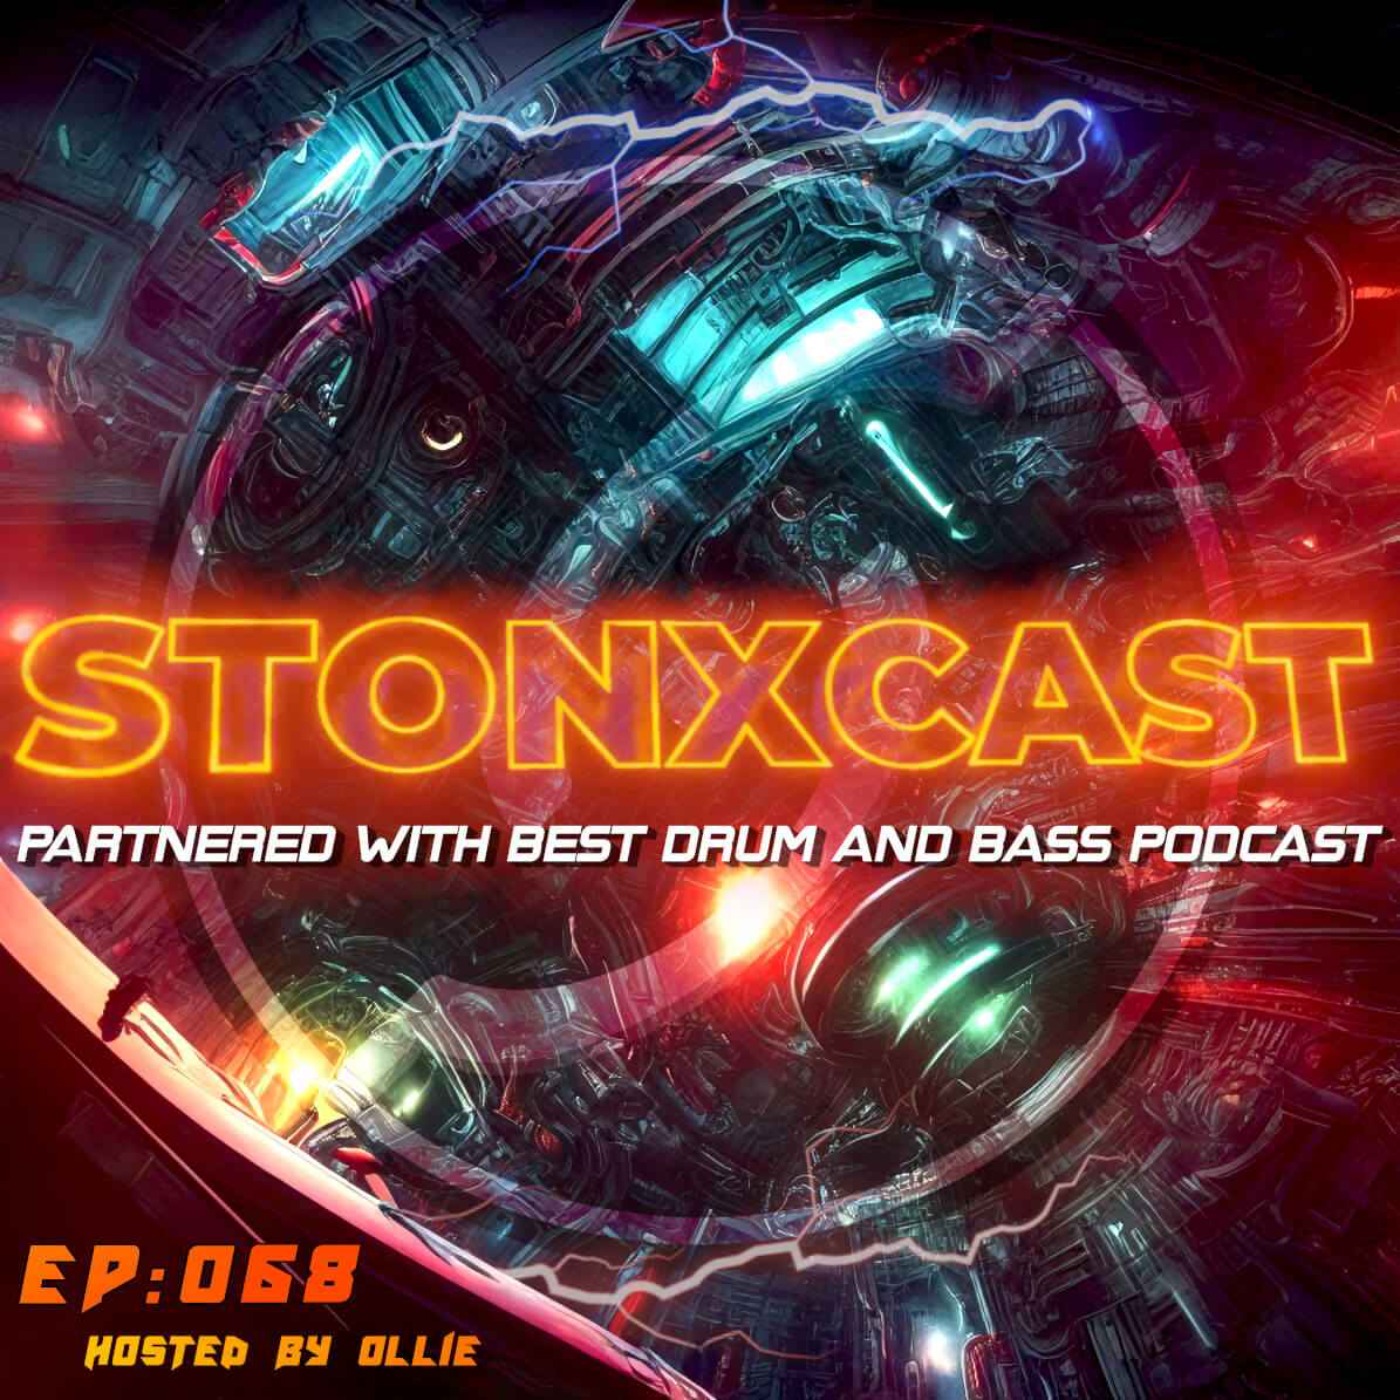 Stonxcast EP:068 - Hosted by Ollie Guest Mix From Avile Artwork